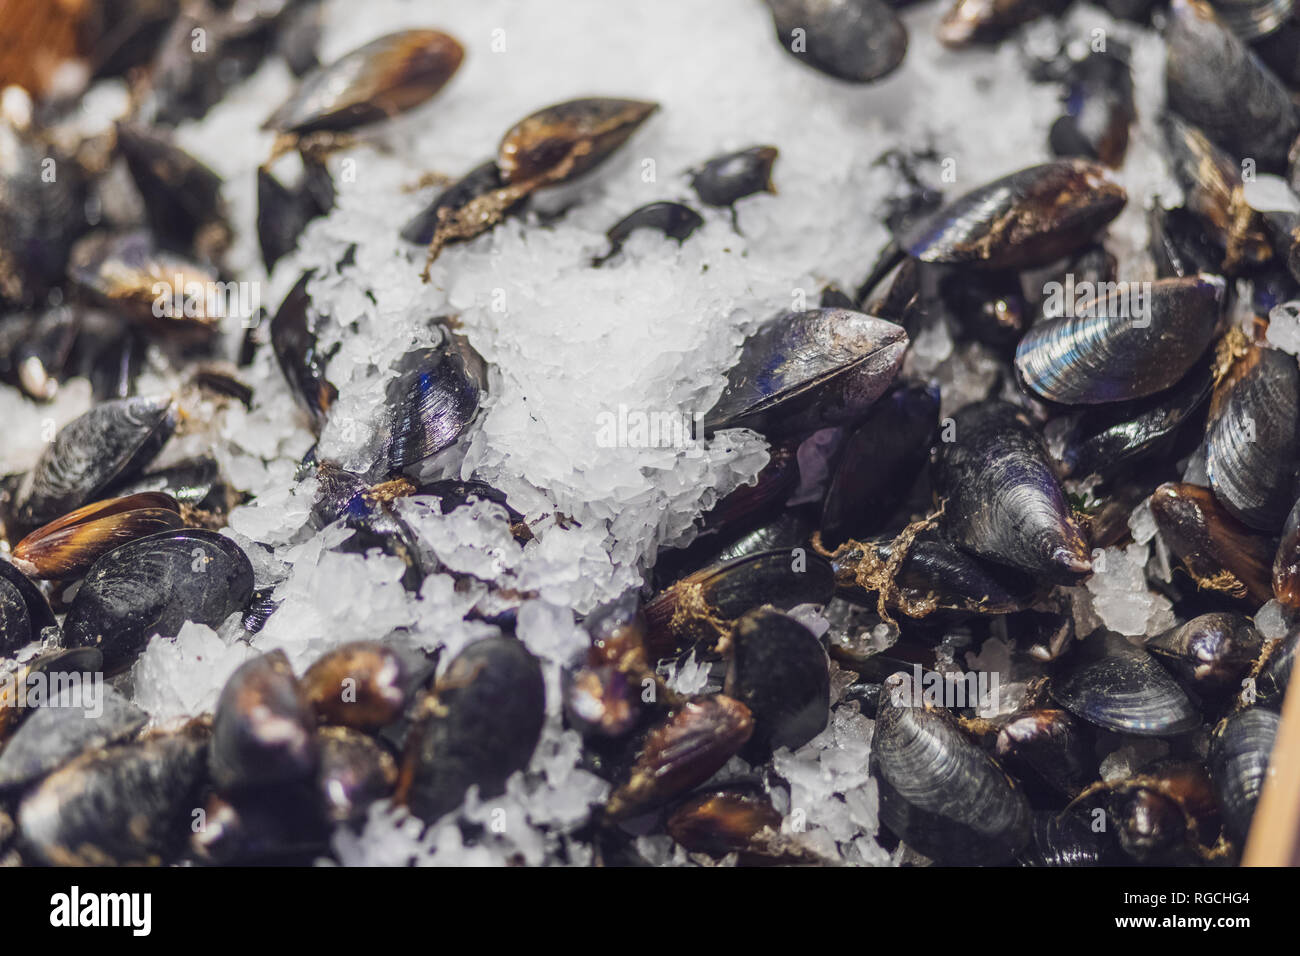 USA, Seattle, Pike Place Public Market, blue mussels in ice Stock Photo